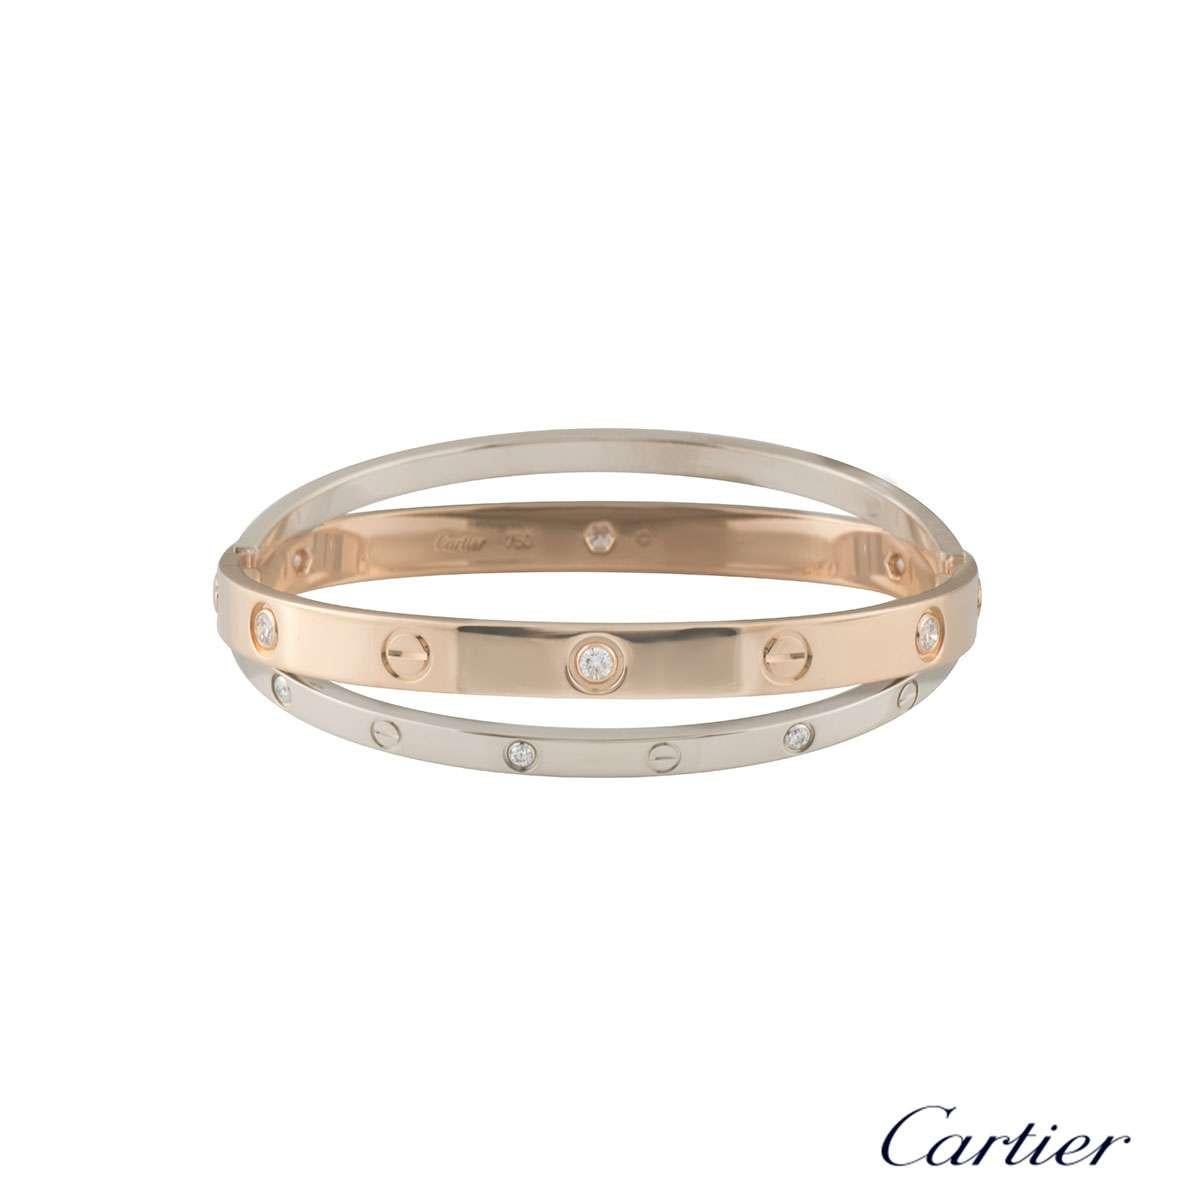 An 18k double rose and white gold diamond Love bangle by Cartier from the Love collection. The rose gold bangle is set with 6 round brilliant cut diamonds and alternating screw motifs, interlinking with it is a white gold band on either side also